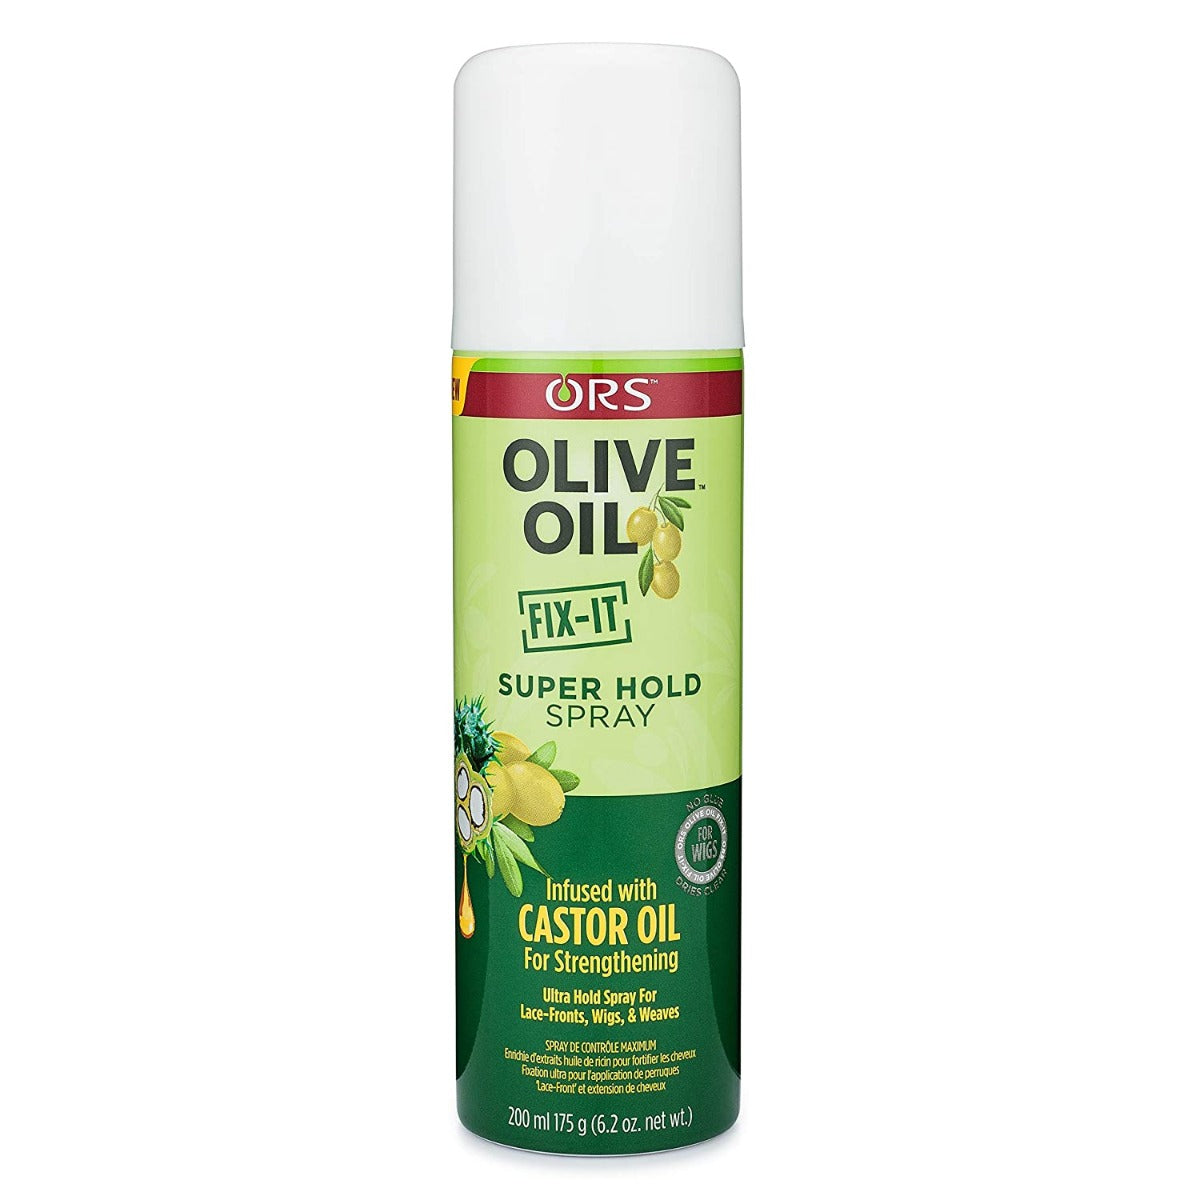 ORS Olive Oil Fix it Super Hold Spray 200ml